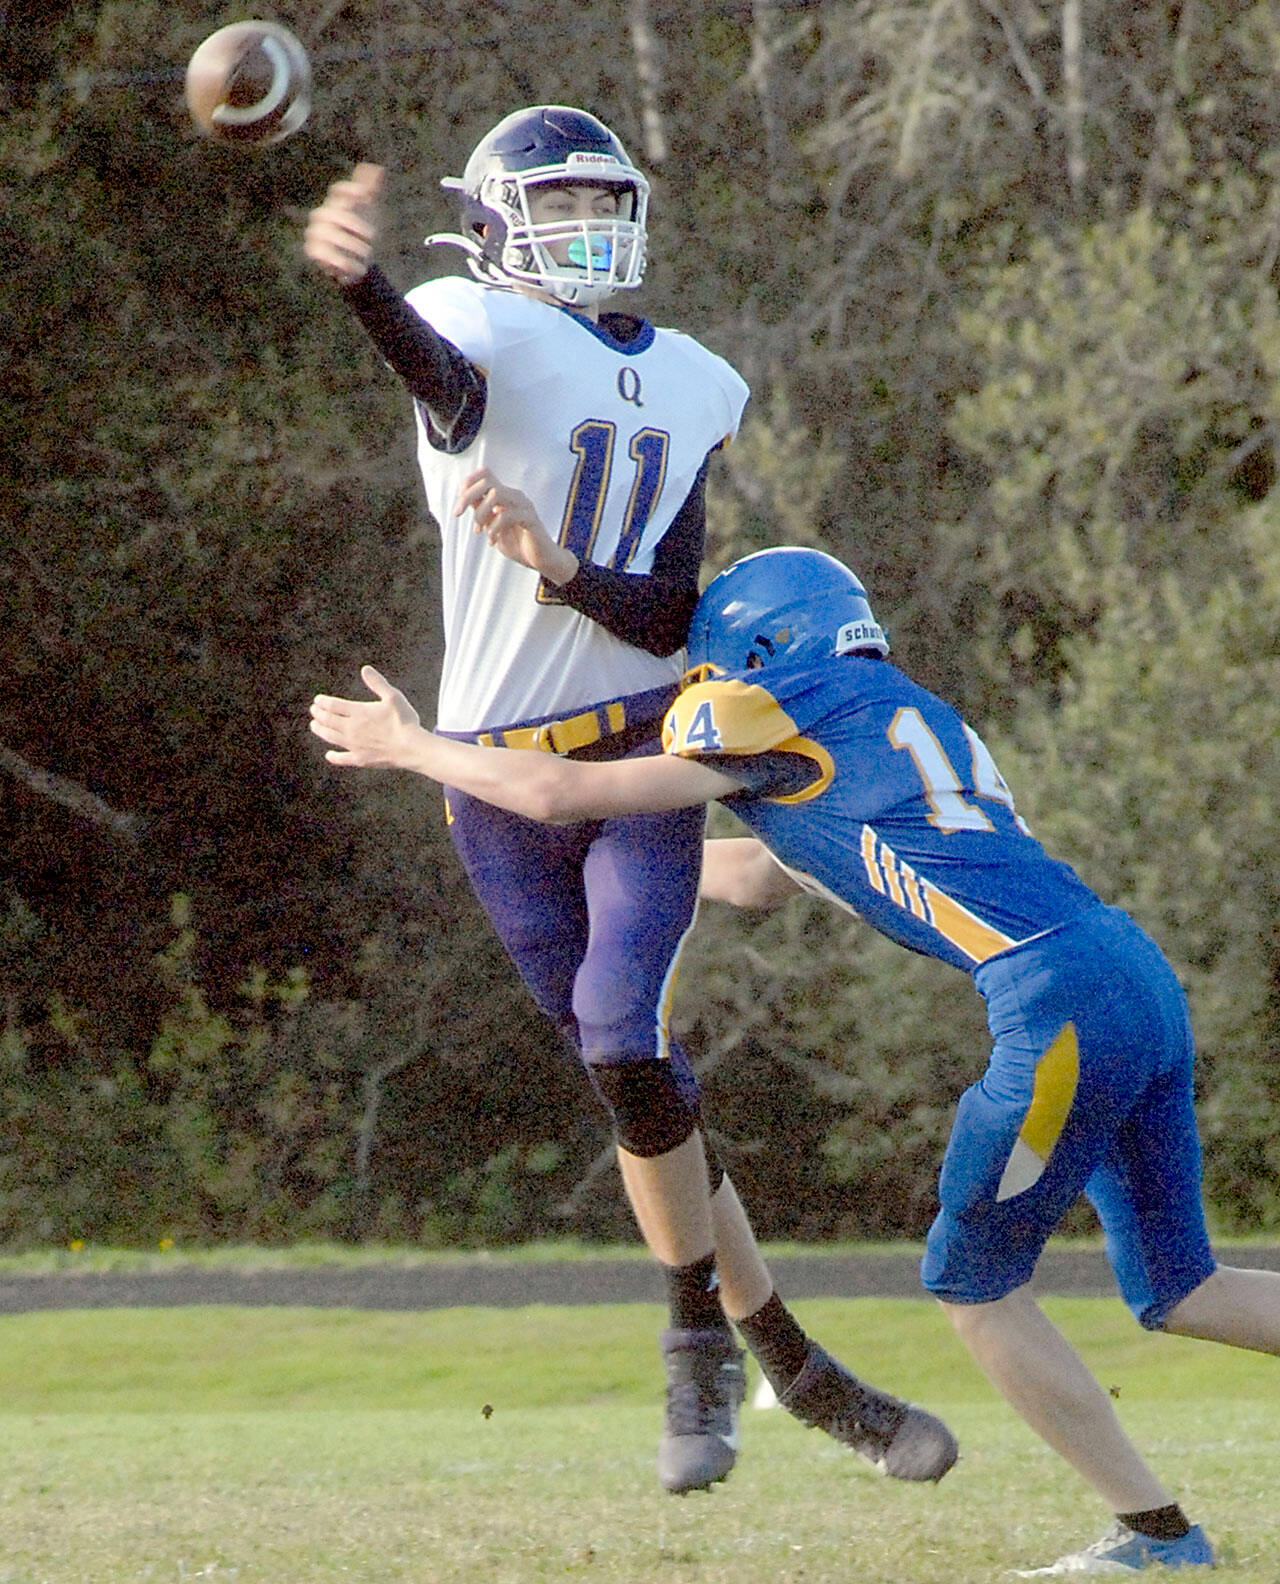 Quilcene quaterback Nathan Kieffer passes before being tackled by Crescent’s Cole Grooms on Thursday at Crescent High School. (Keith Thorpe/Peninsula Daily News)